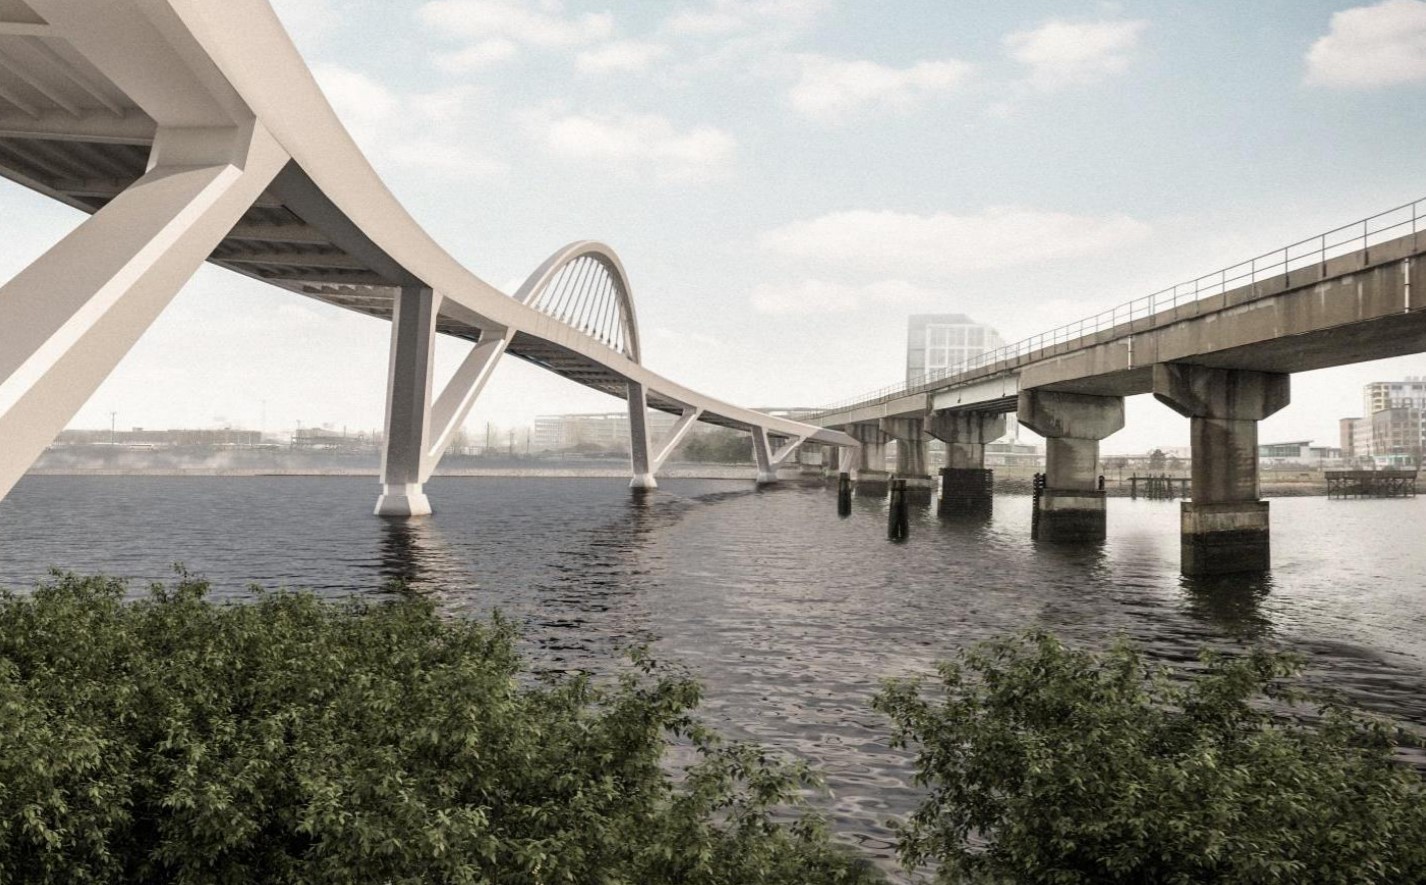 An architect's rendering shows two bridges crossing a river. The illustration of the new bridge, on the right, shows a bridge with large arches swooping over the water. The illustration is superimposed on a photograph that shows an existing, plainer railroad bridge on the right.